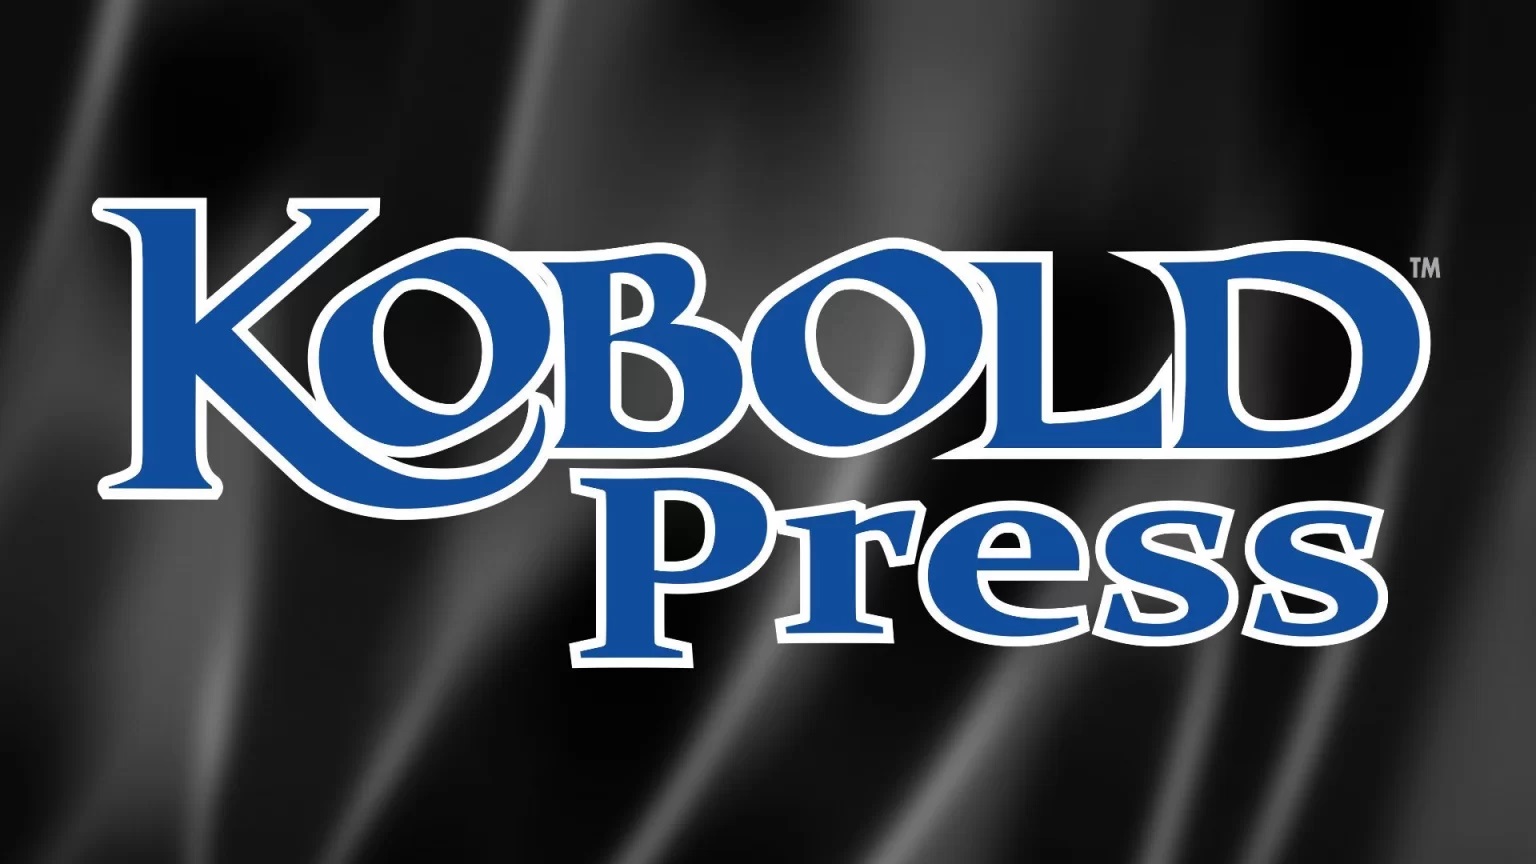 Kobold Press announces original system in response to D&D license issues